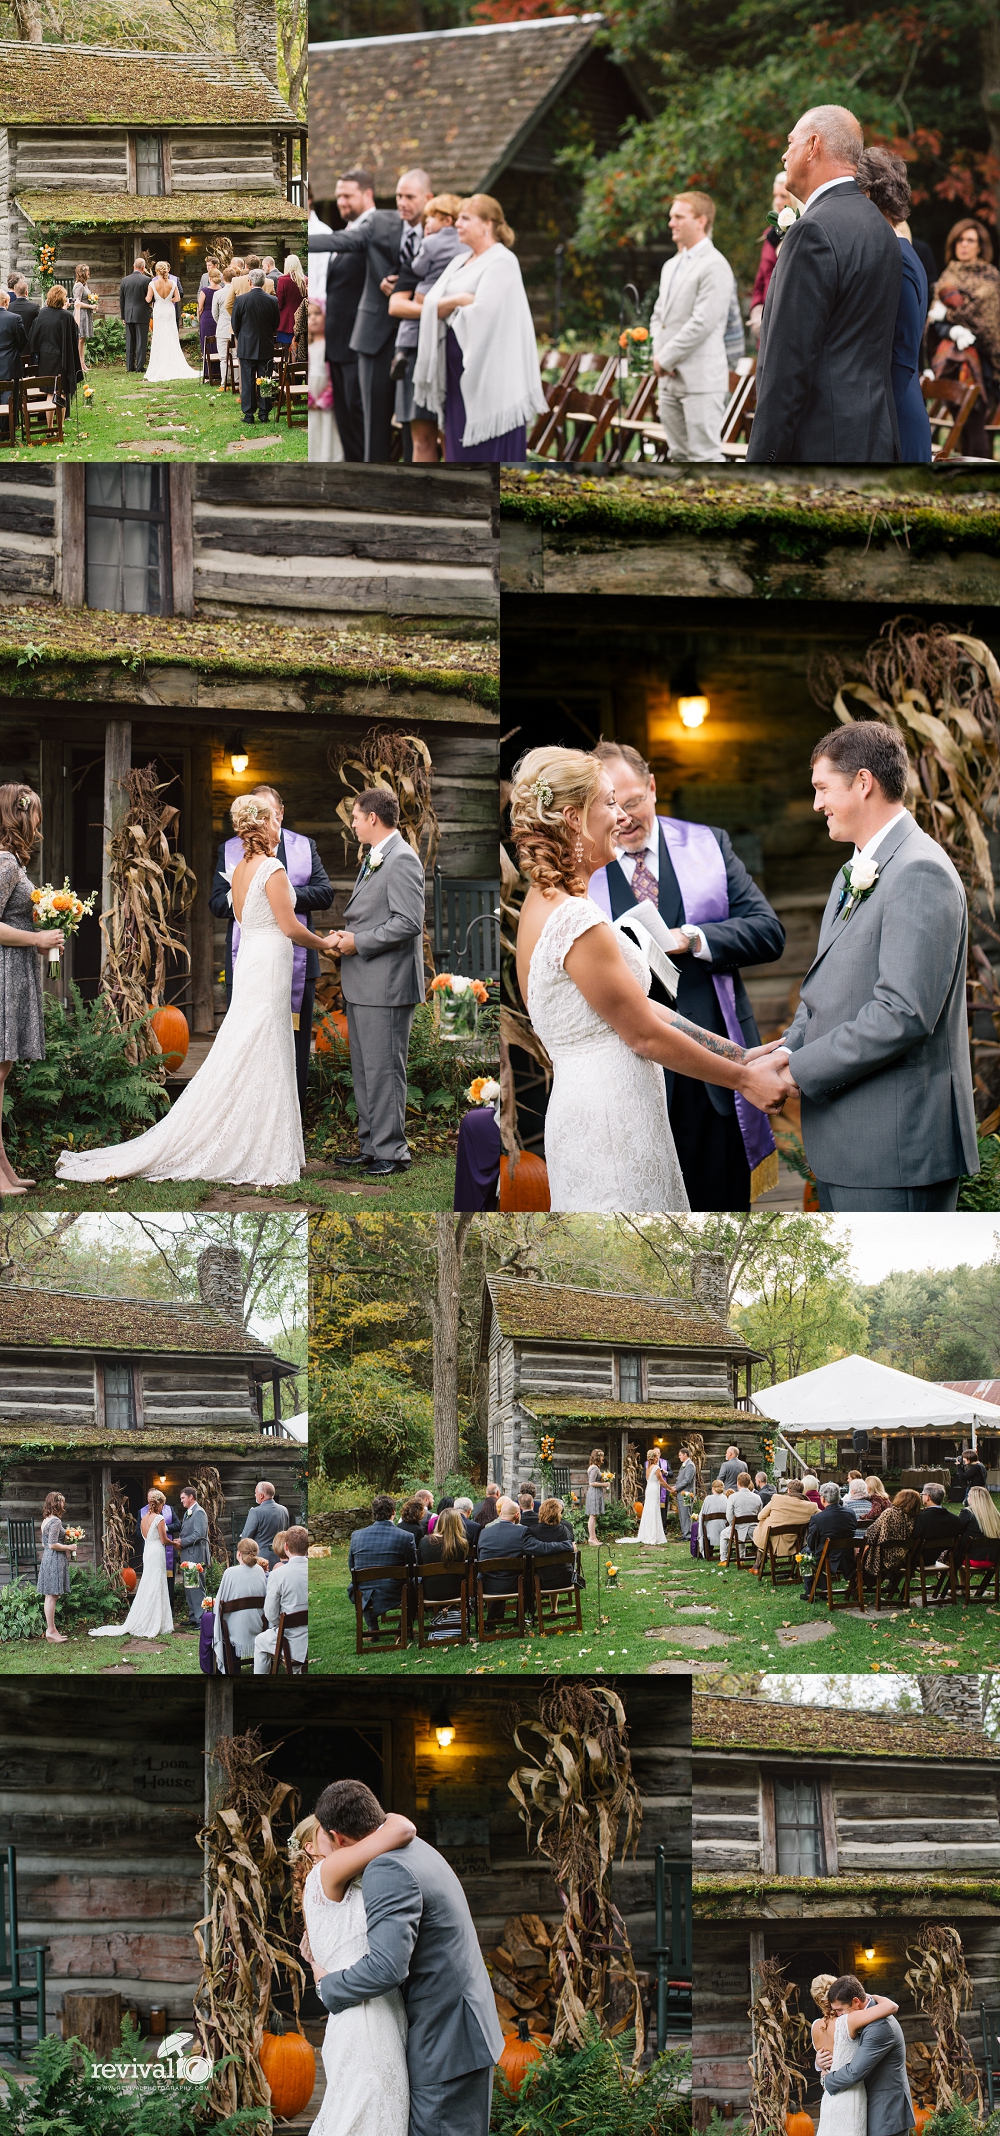 Intimate Bed and Breakfast Hotel Wedding at The Mast Farm Inn Valle Crucis NC Photography by Revival Photography www.revivalphotography.com